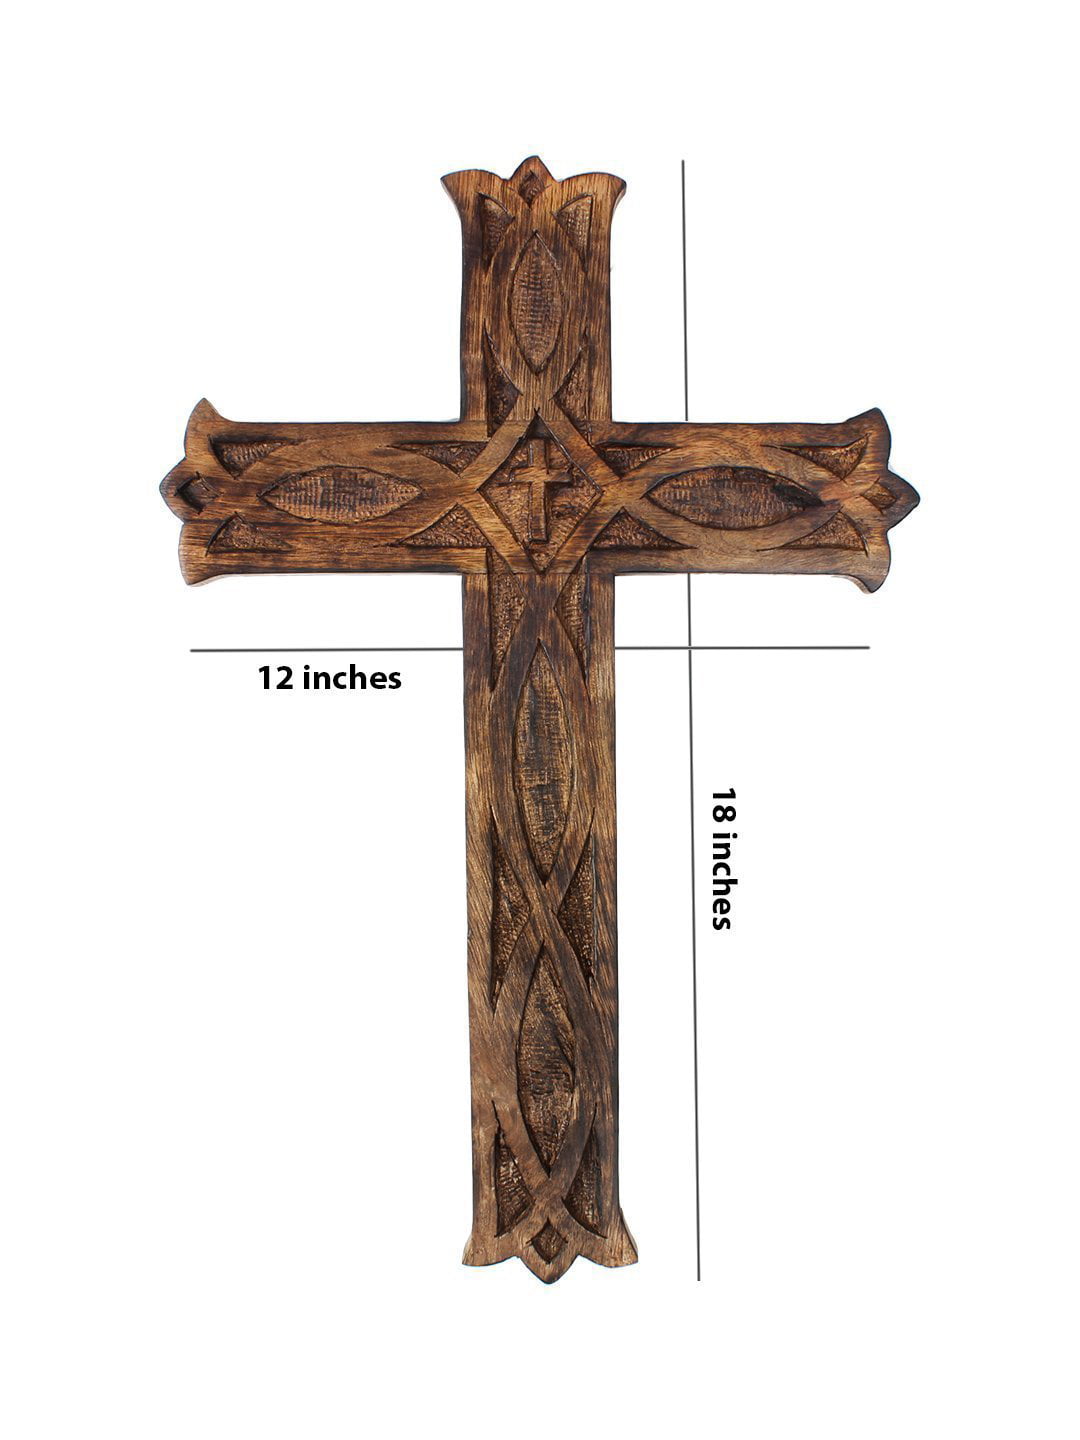 Wooden Religious Catholic Crucifix Cross Wall Hanging 12 x 8 Inches French Plaque Floral Carvings Living Room Home Decor Accent Church Chapel Altar Wall Art Decor Display Antiqued Rustic Finish